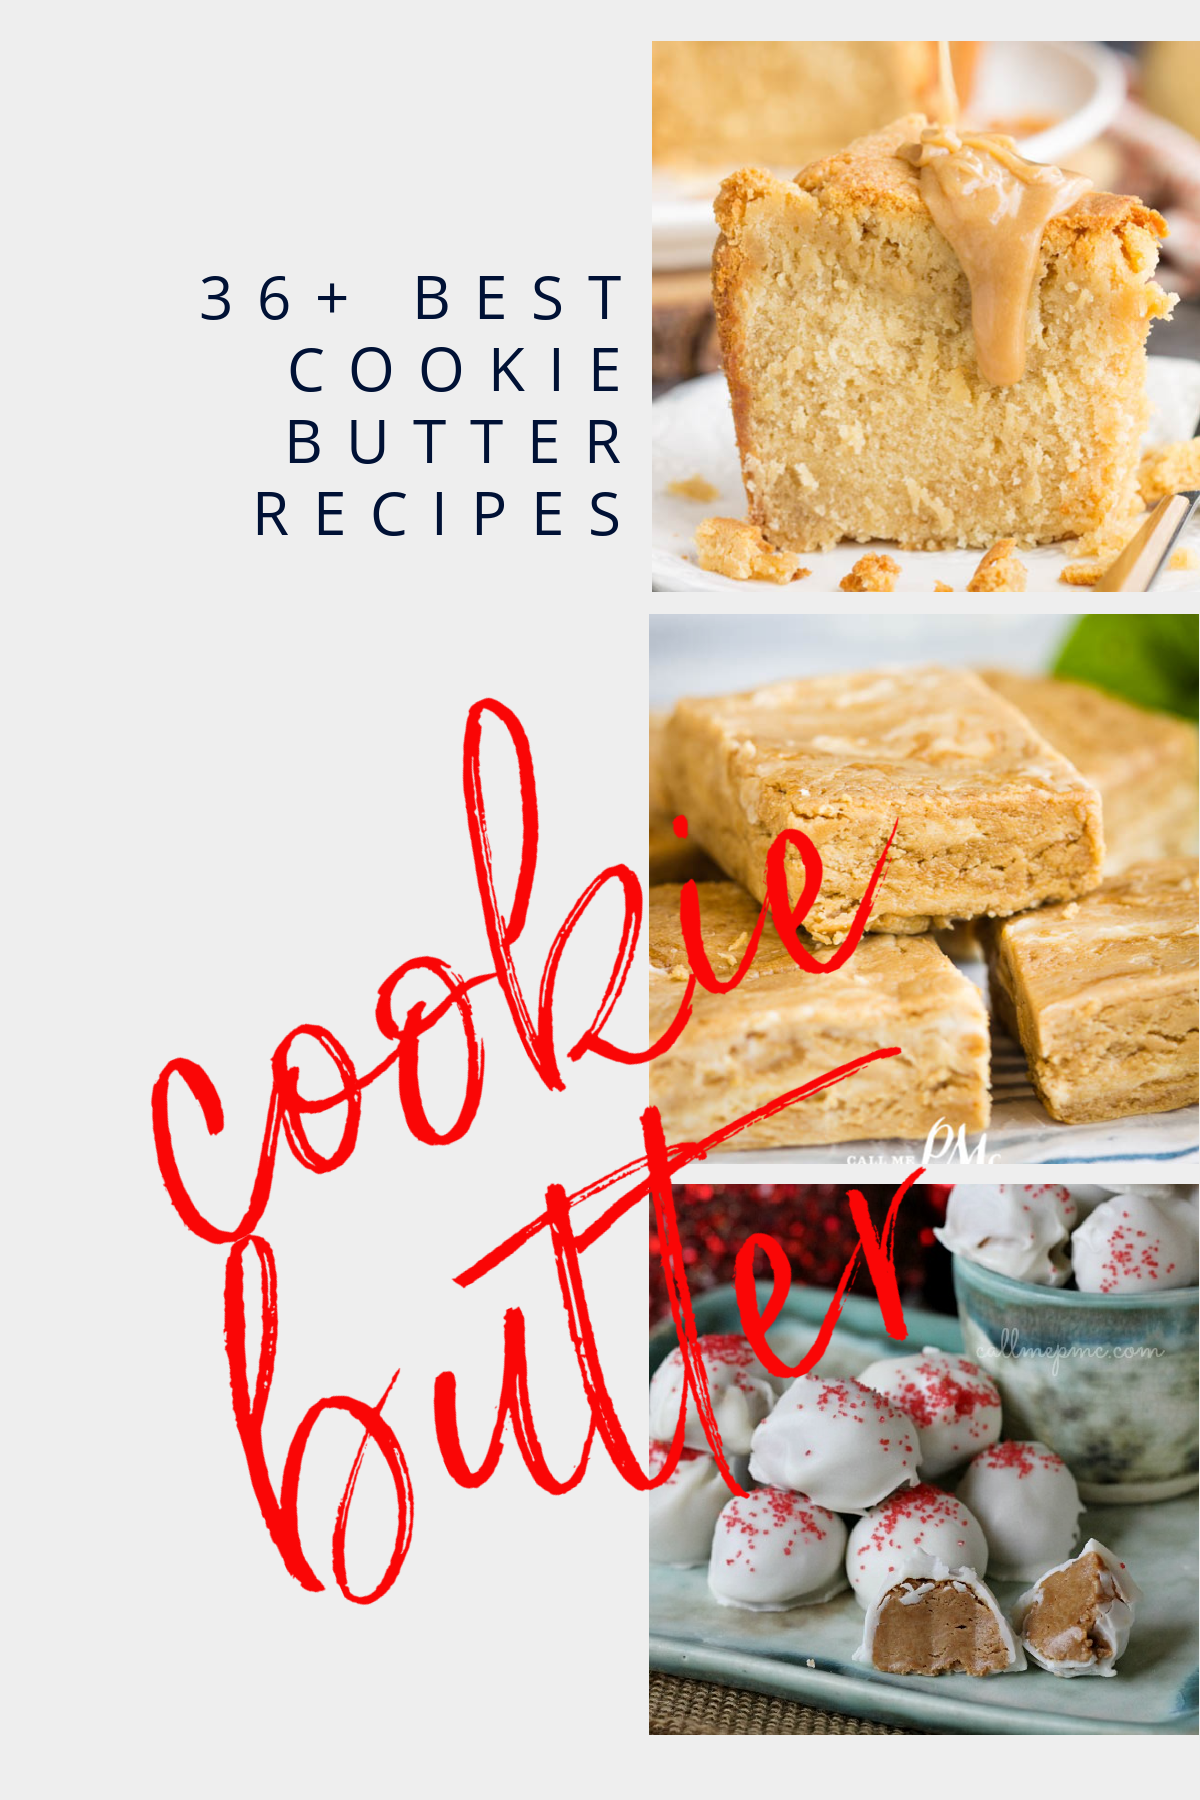 Best 36+ Cookie Butter Recipes to Make Now. These decadent desserts made with cookie butter will become your new guilty pleasure!